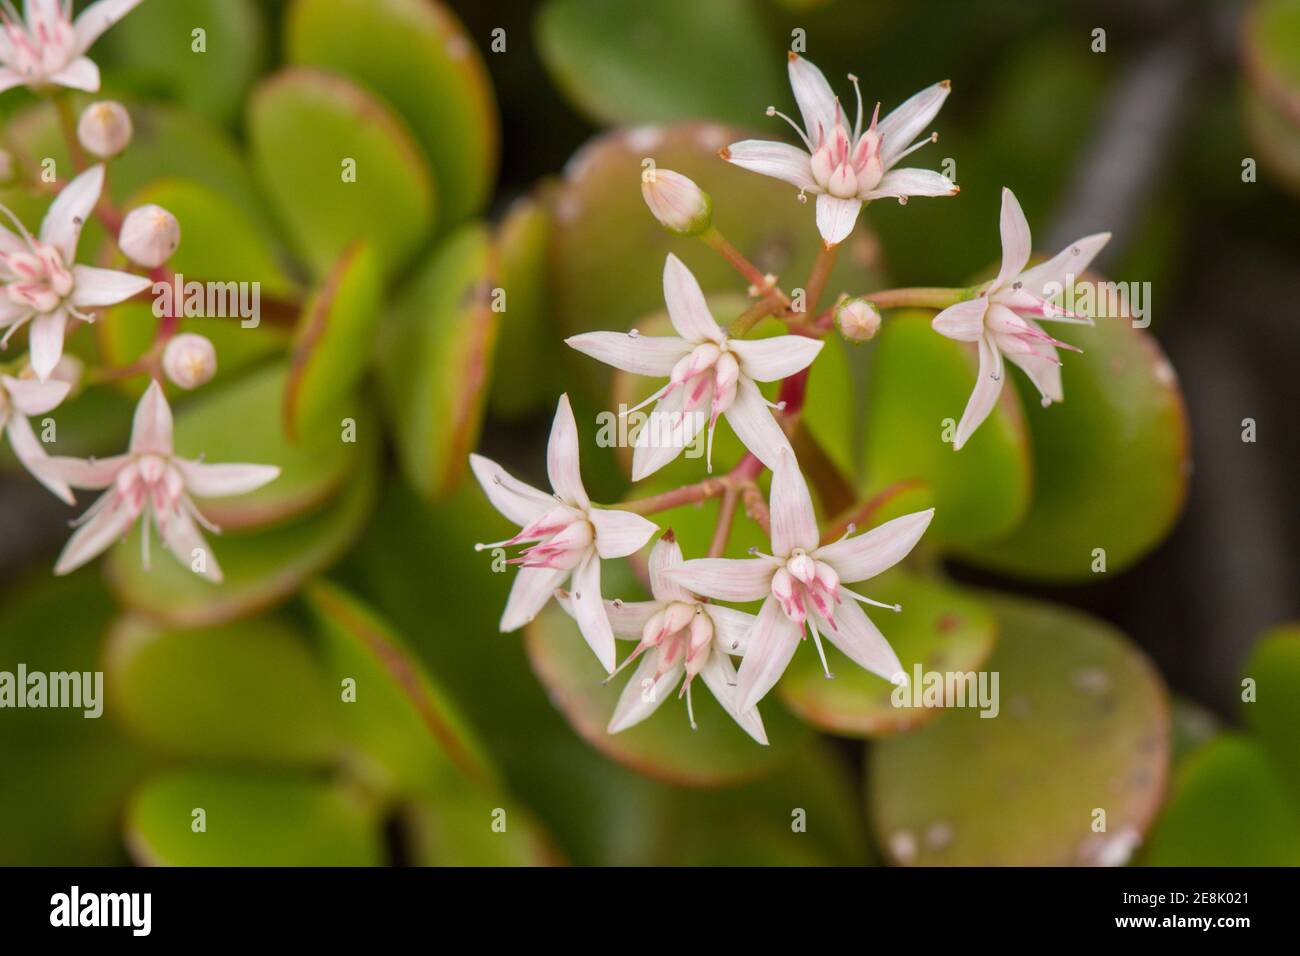 Flowers of Jade plant, Crassula ovata, succulent plant growing in a garden. Spain Stock Photo